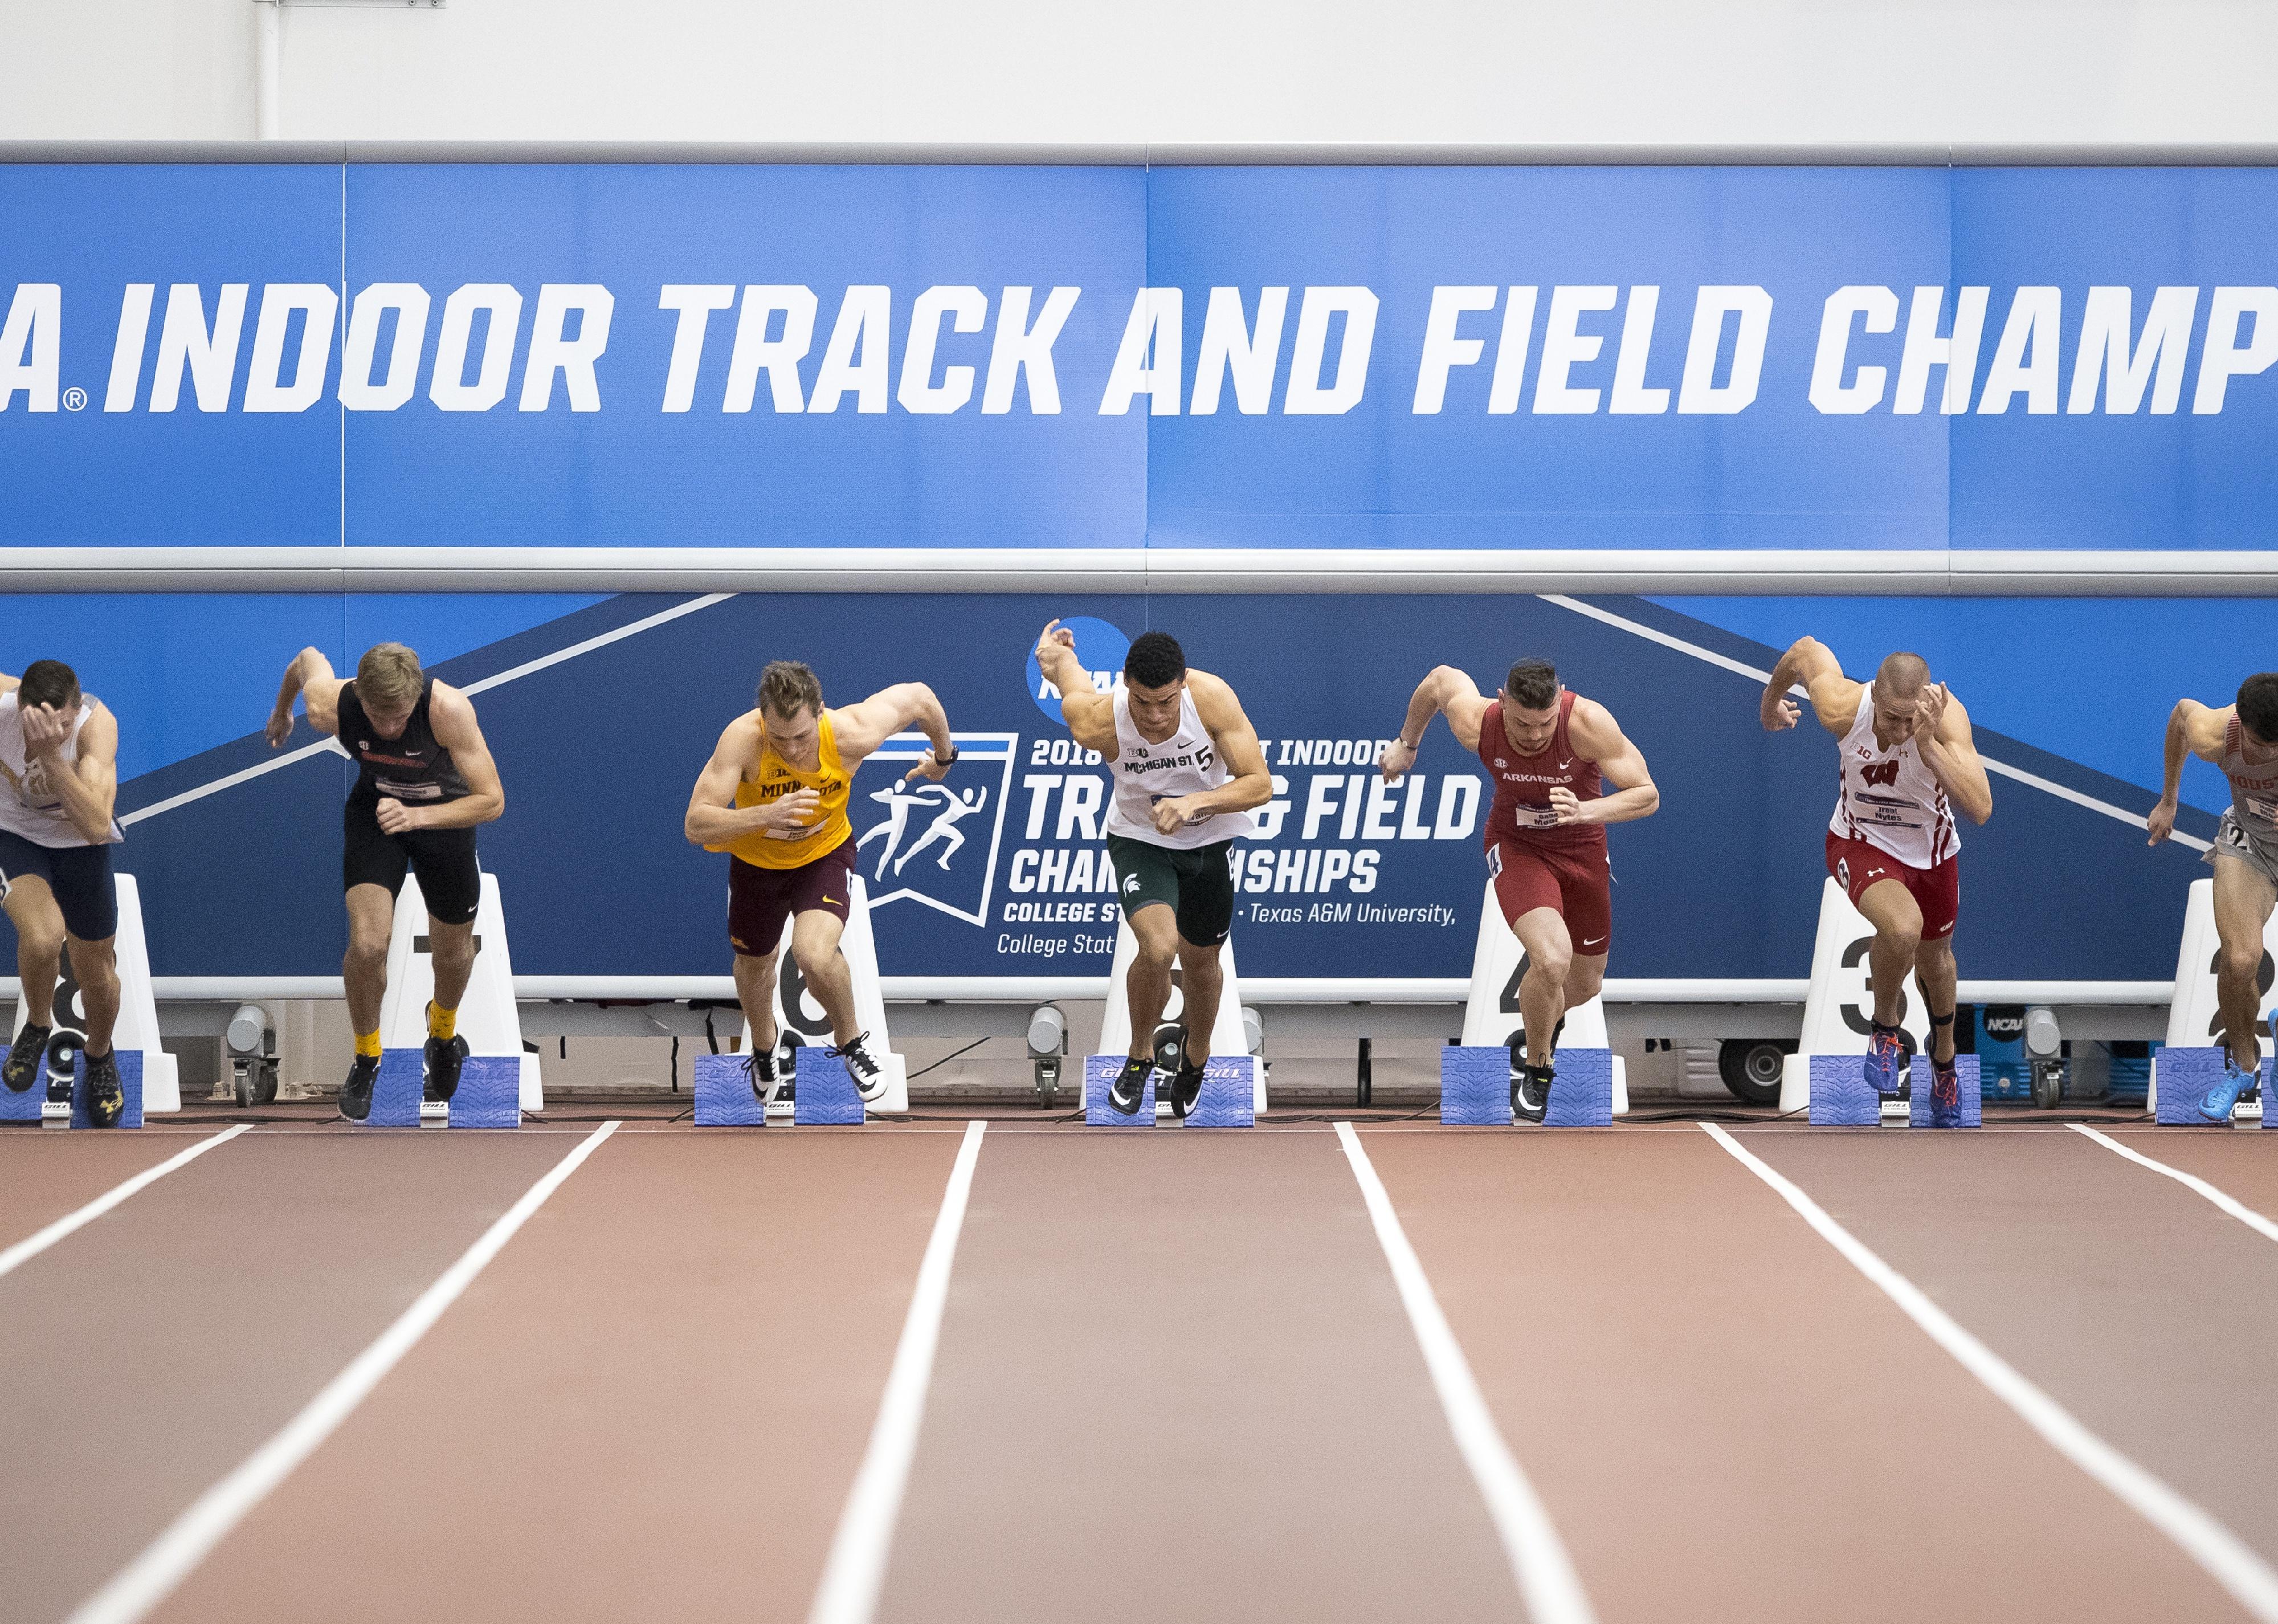 NCAA track runners starting a race.